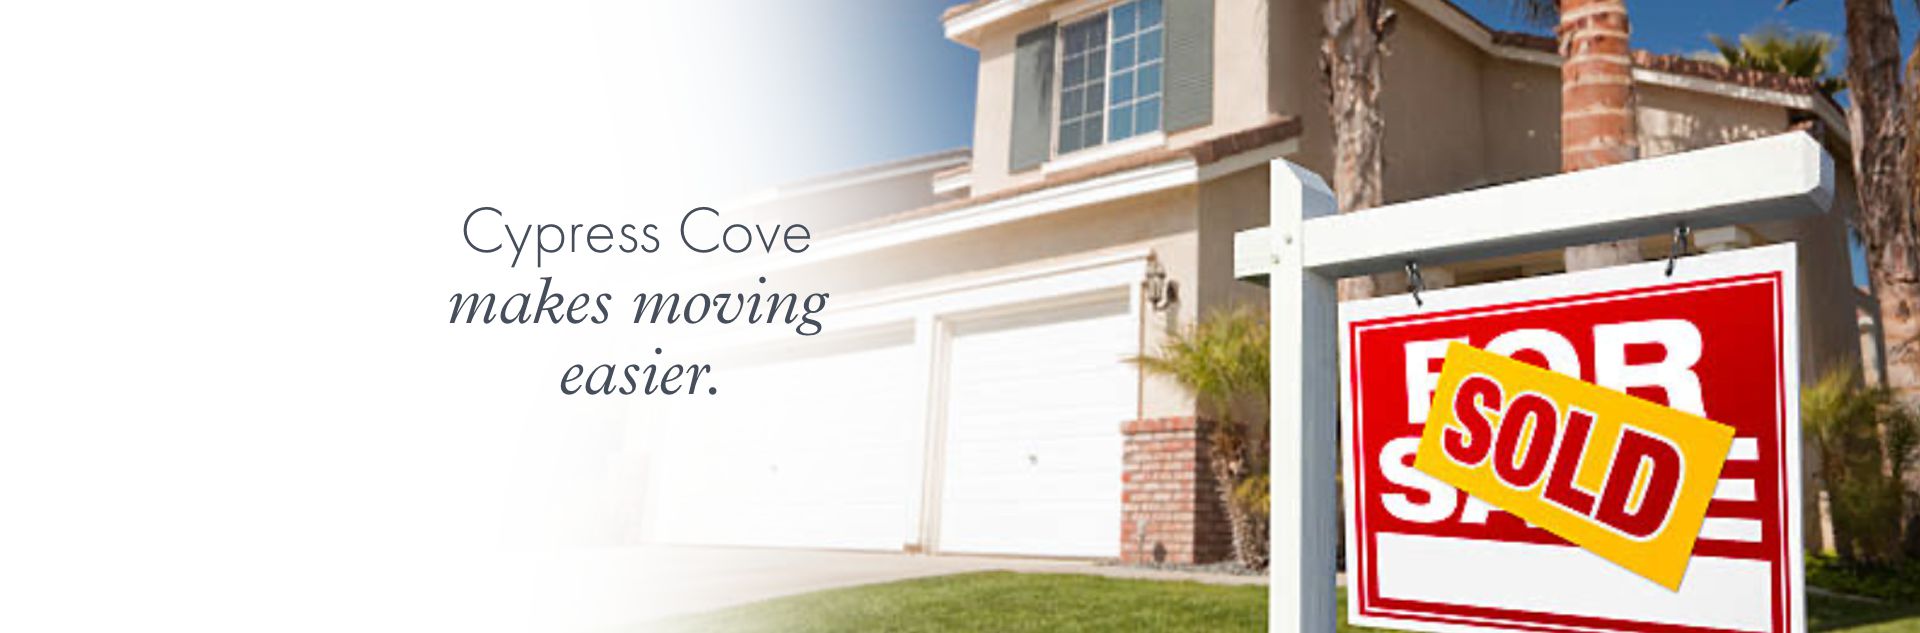 Cypress Cove makes moving easier